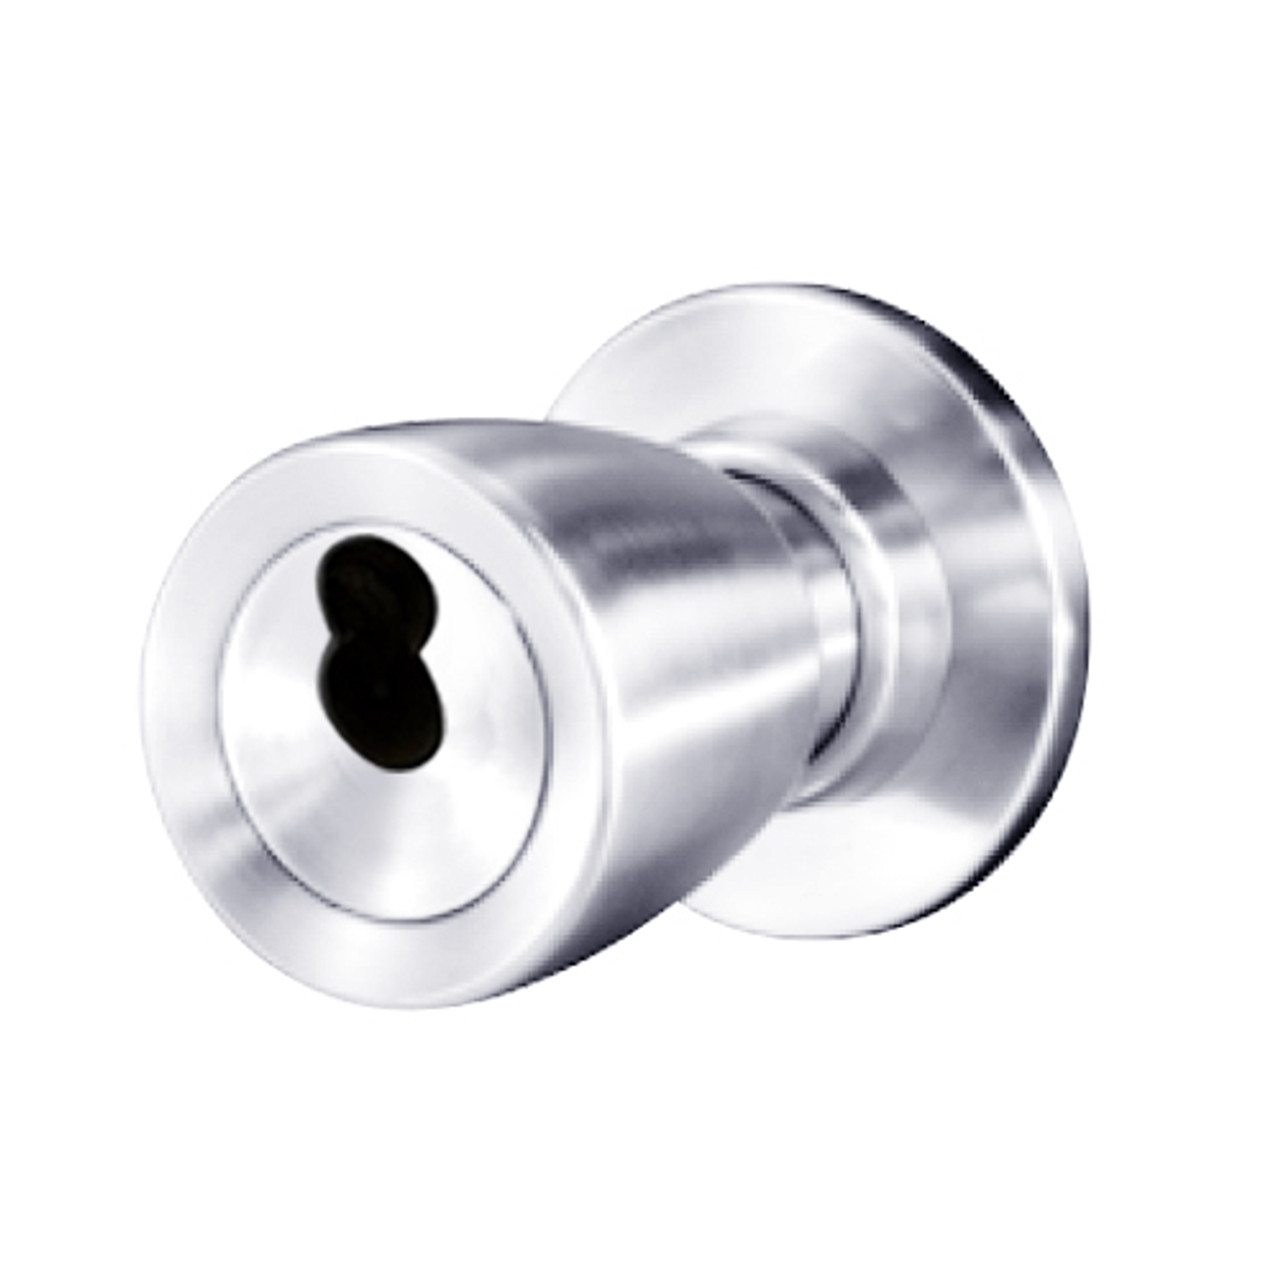 8K37C6CSTK625 Best 8K Series Apartment Heavy Duty Cylindrical Knob Locks with Tulip Style in Bright Chrome